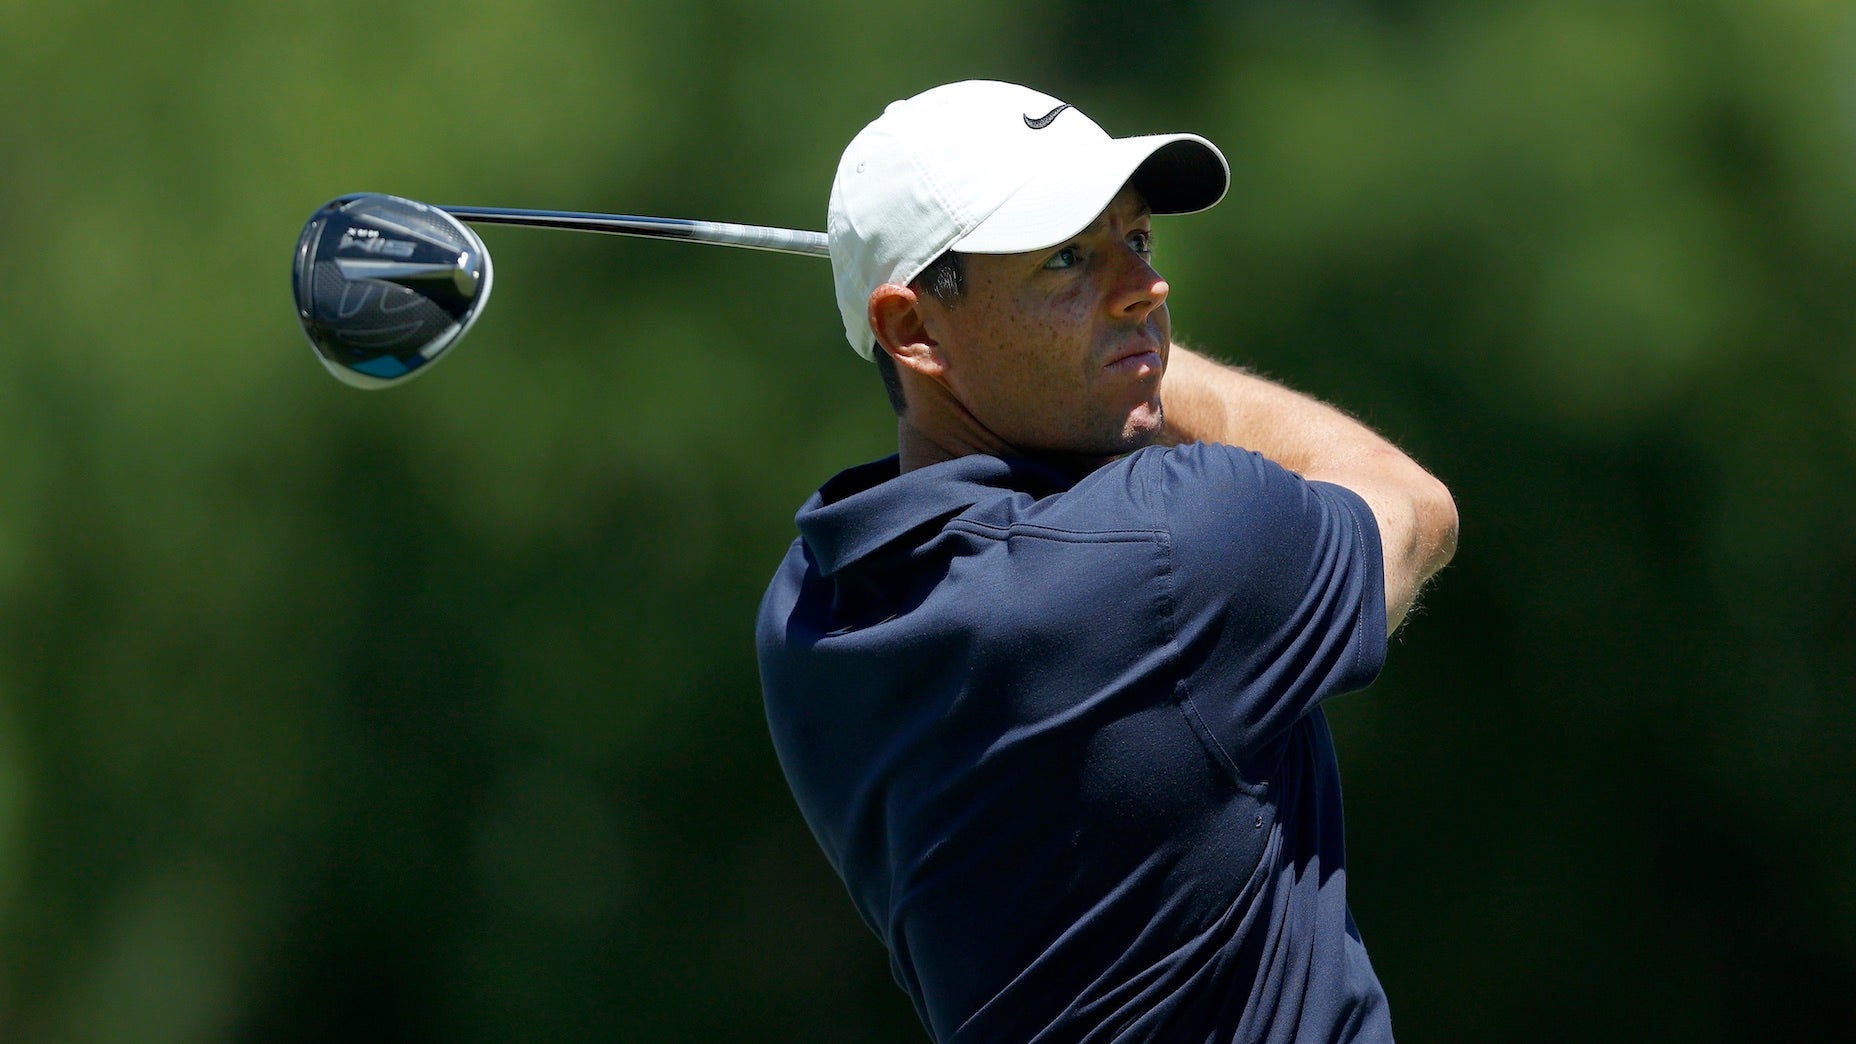 5 equipment storylines: Why Rory changed drivers, Sergio's gear and more